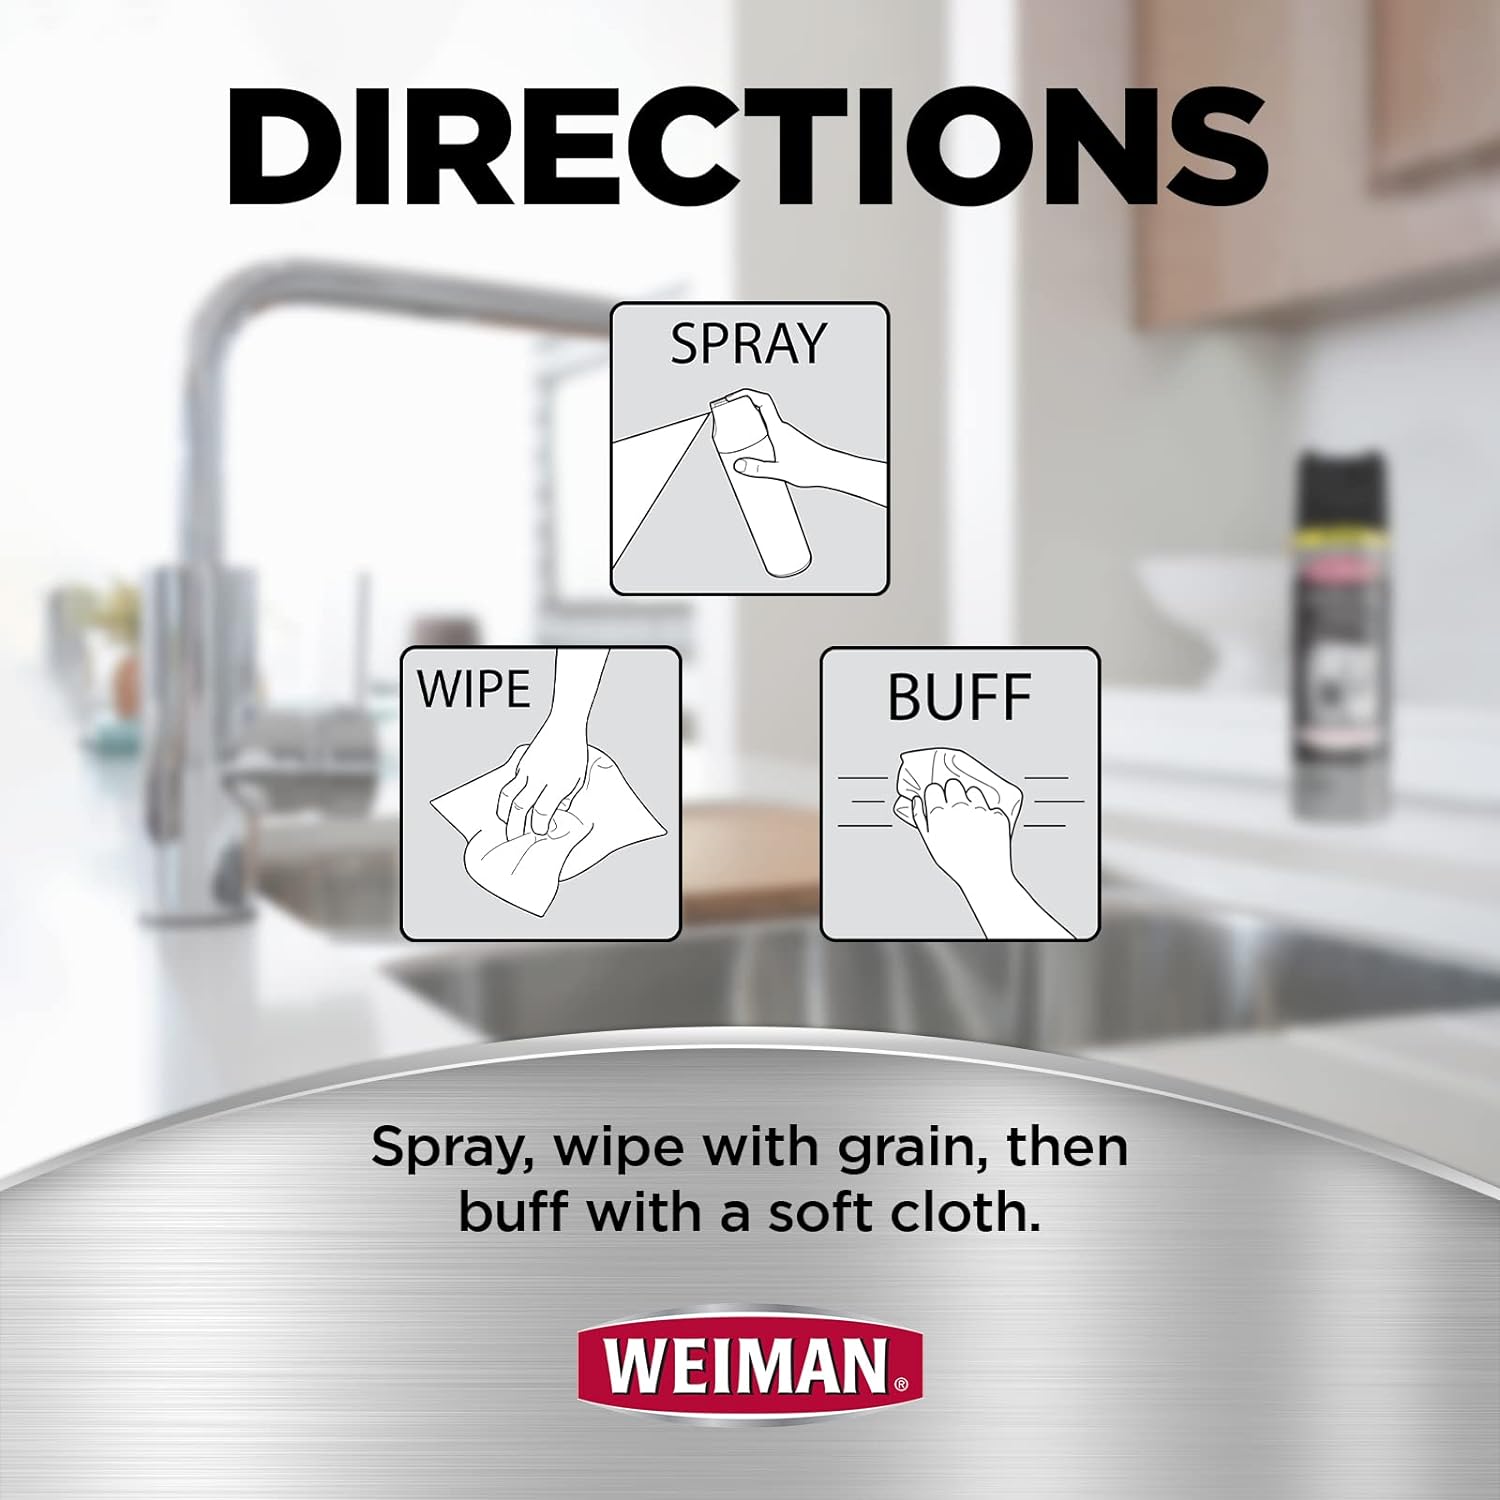 Weiman Stainless Steel Cleaner & Polish Streak-Free Shine - For Refrigerators, Oven, Dishwasher, Stove - 2 Pack Aerosol Spray with Microfiber Cloth Included : Health & Household